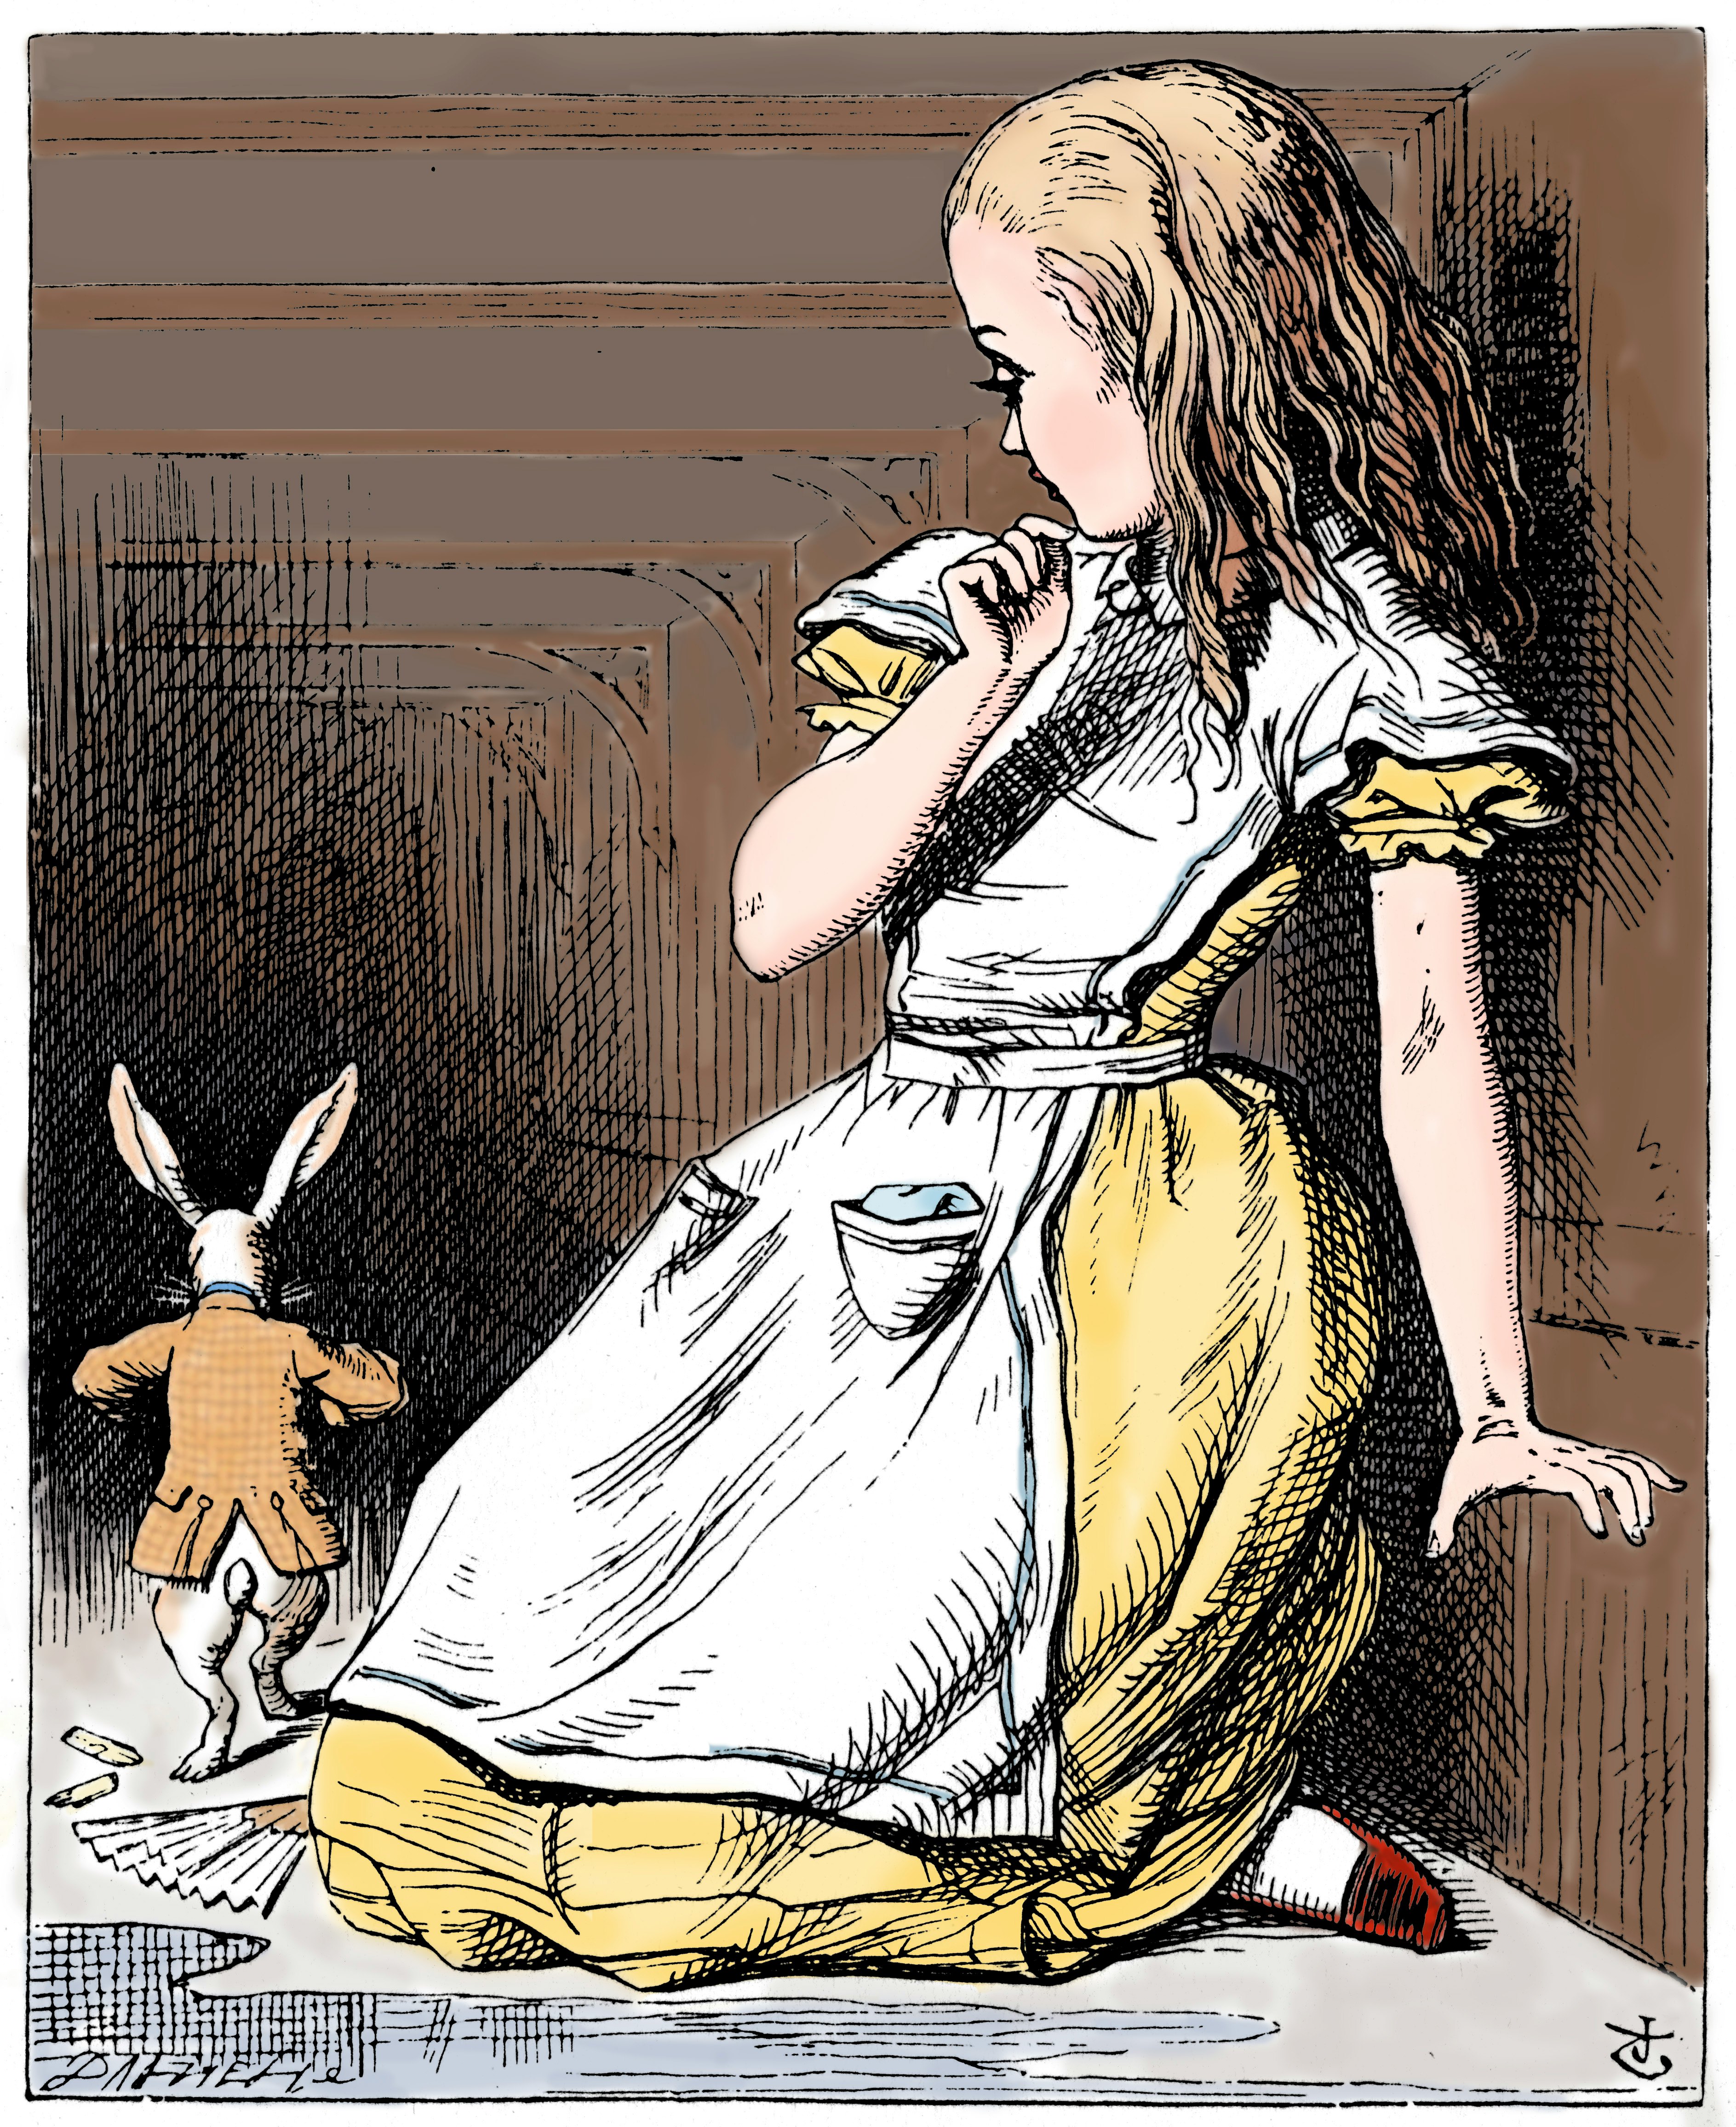 The mystery of Alice in Wonderland syndrome